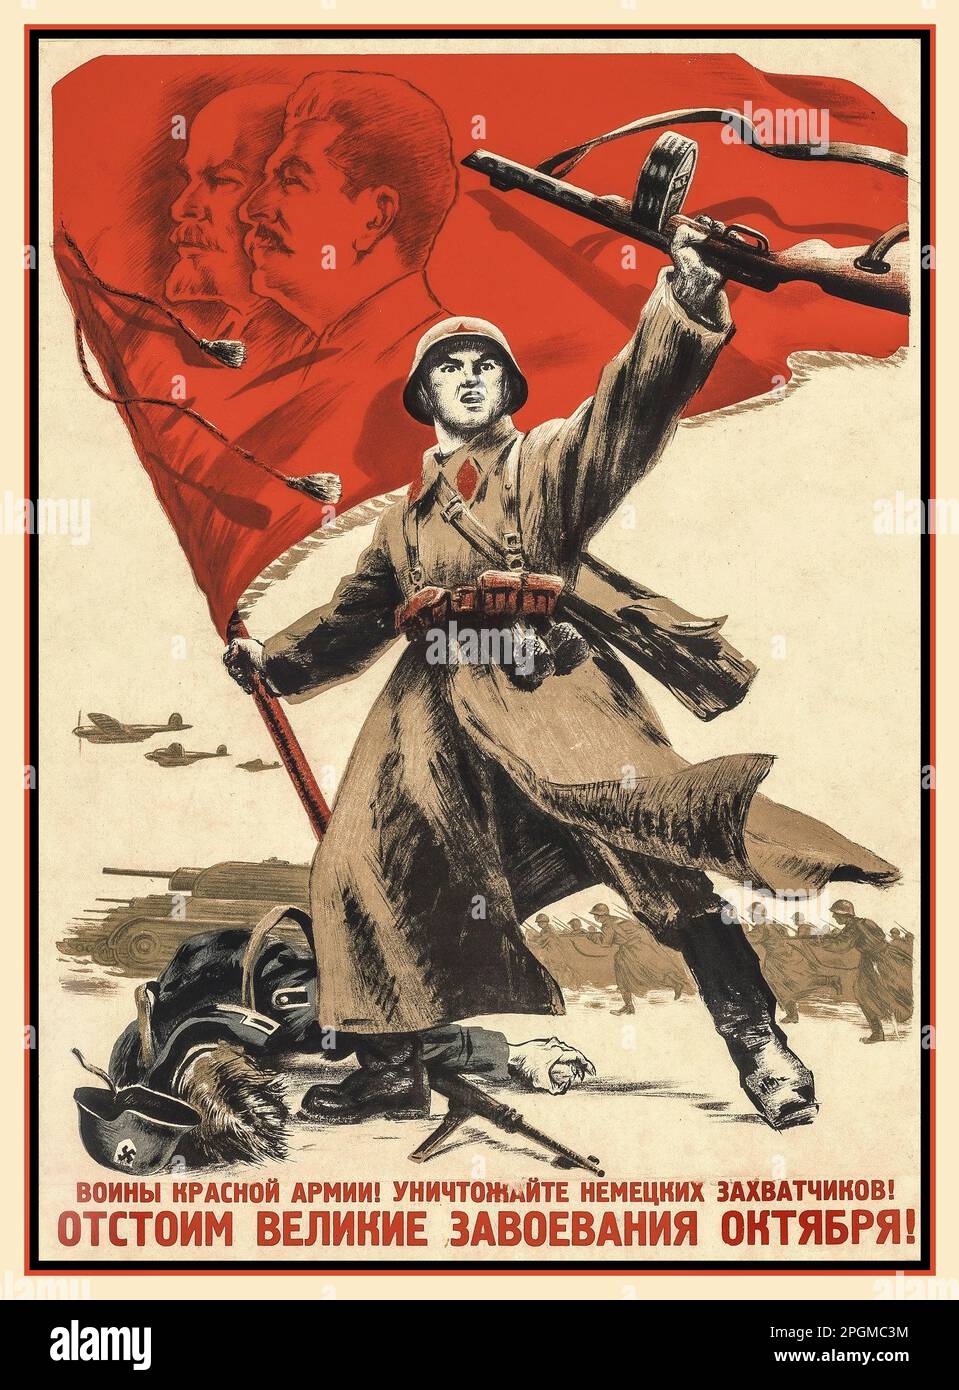 1942 OPERATION BARBAROSSA Soviet USSR Russian Propaganda Poster 'Warriors of The Red Army Destroy The German Invaders, We Will Defend The Great Conquests of October ' Illustration of Red Army Soldier holding red flag with Soviet leaders Stalin and Lenin in profile, standing over a dead Nazi Wehrmacht soldier as Russian forces advance. Stock Photo